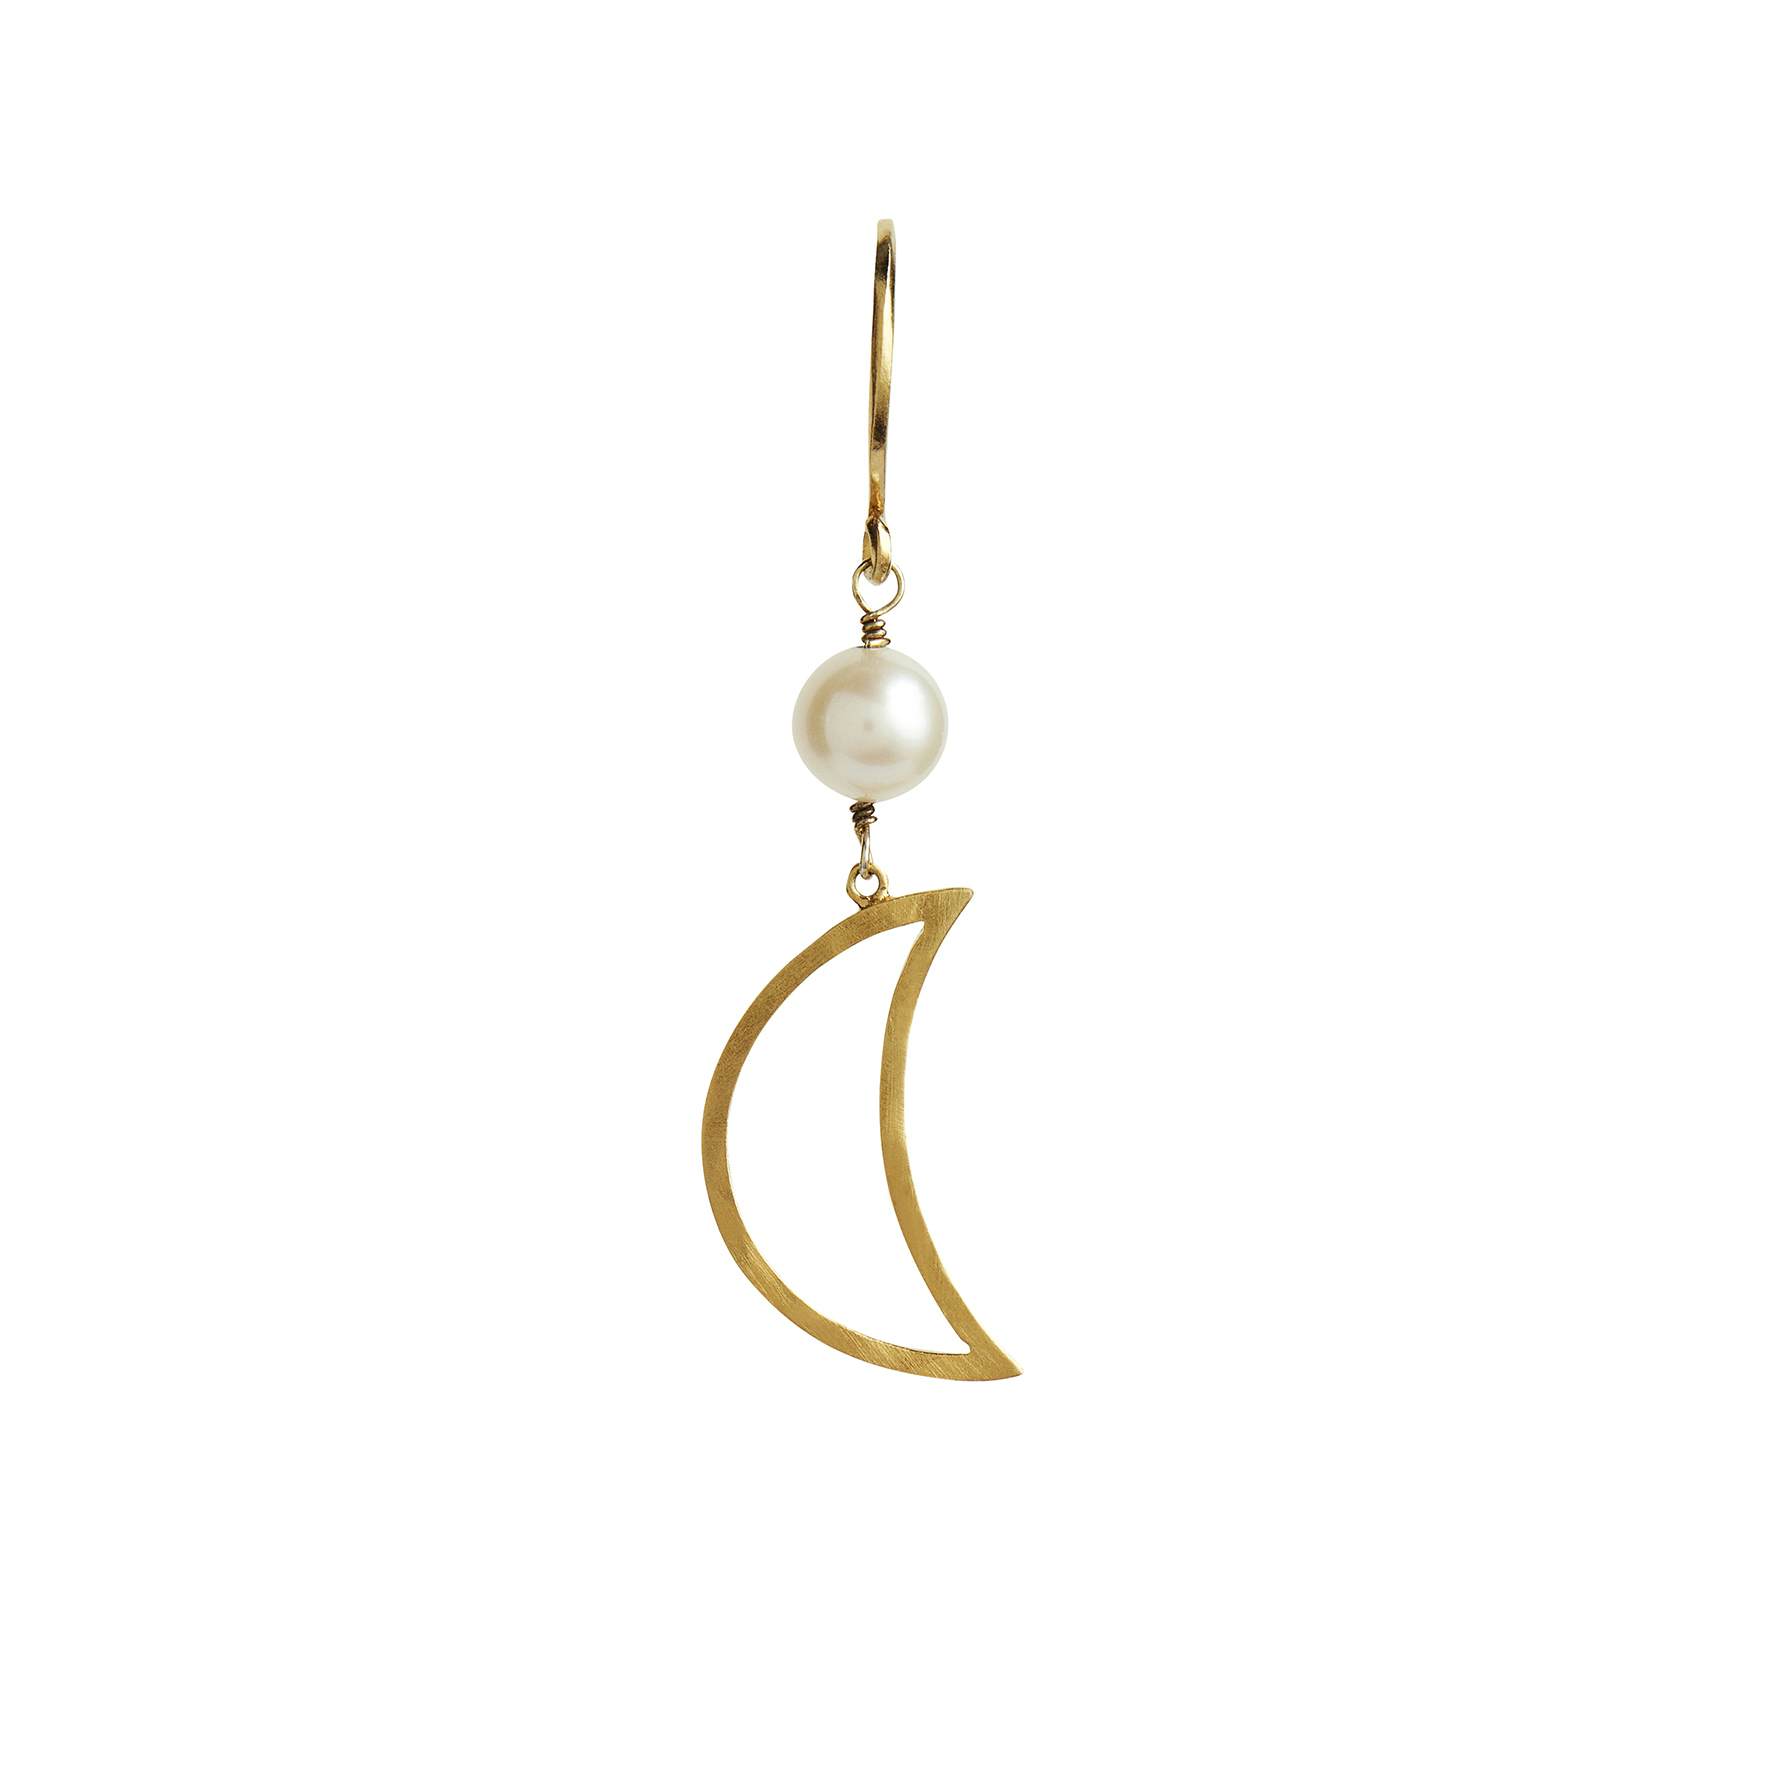 Bella Moon Earring With Pearl fra STINE A Jewelry i Forgylt-Sølv Sterling 925